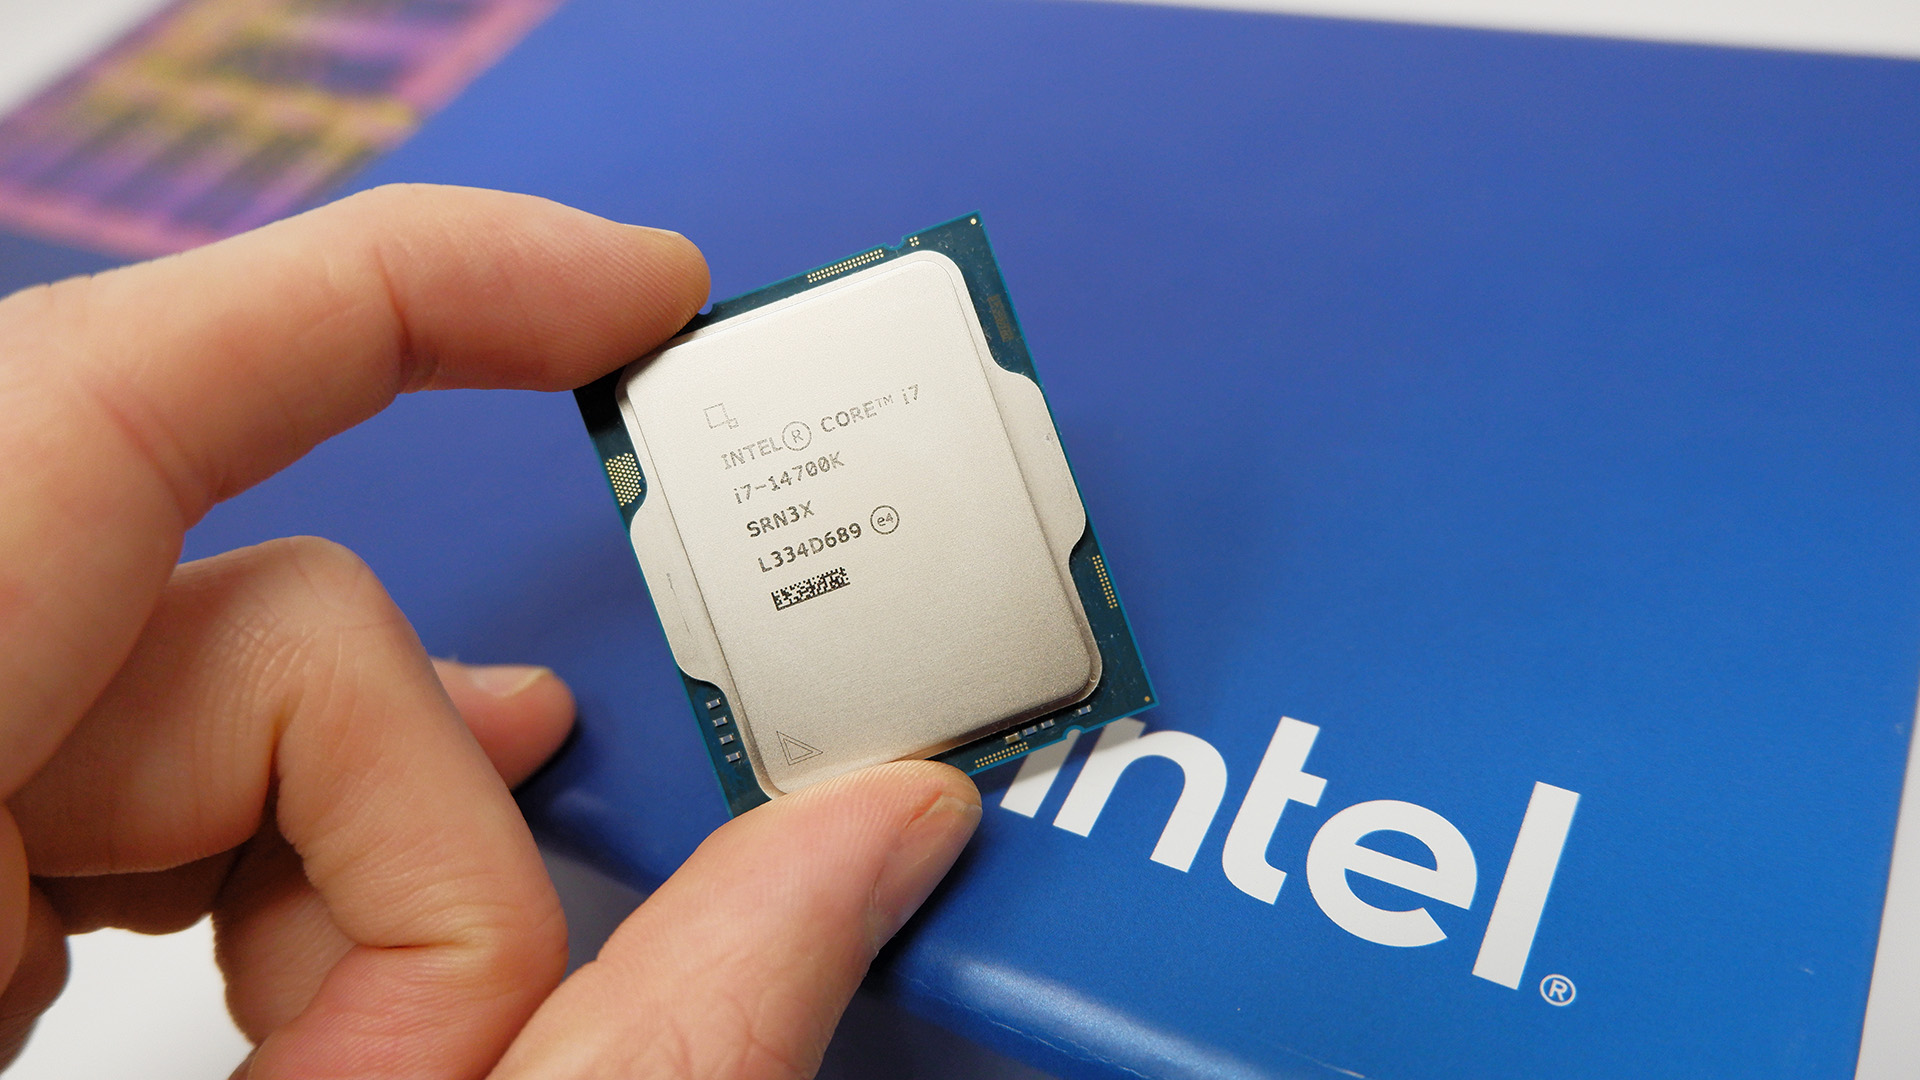  Broken CPUs, workforce cuts, cancelled dividends and a decade of borked silicon—how has it all gone so wrong for Intel? 